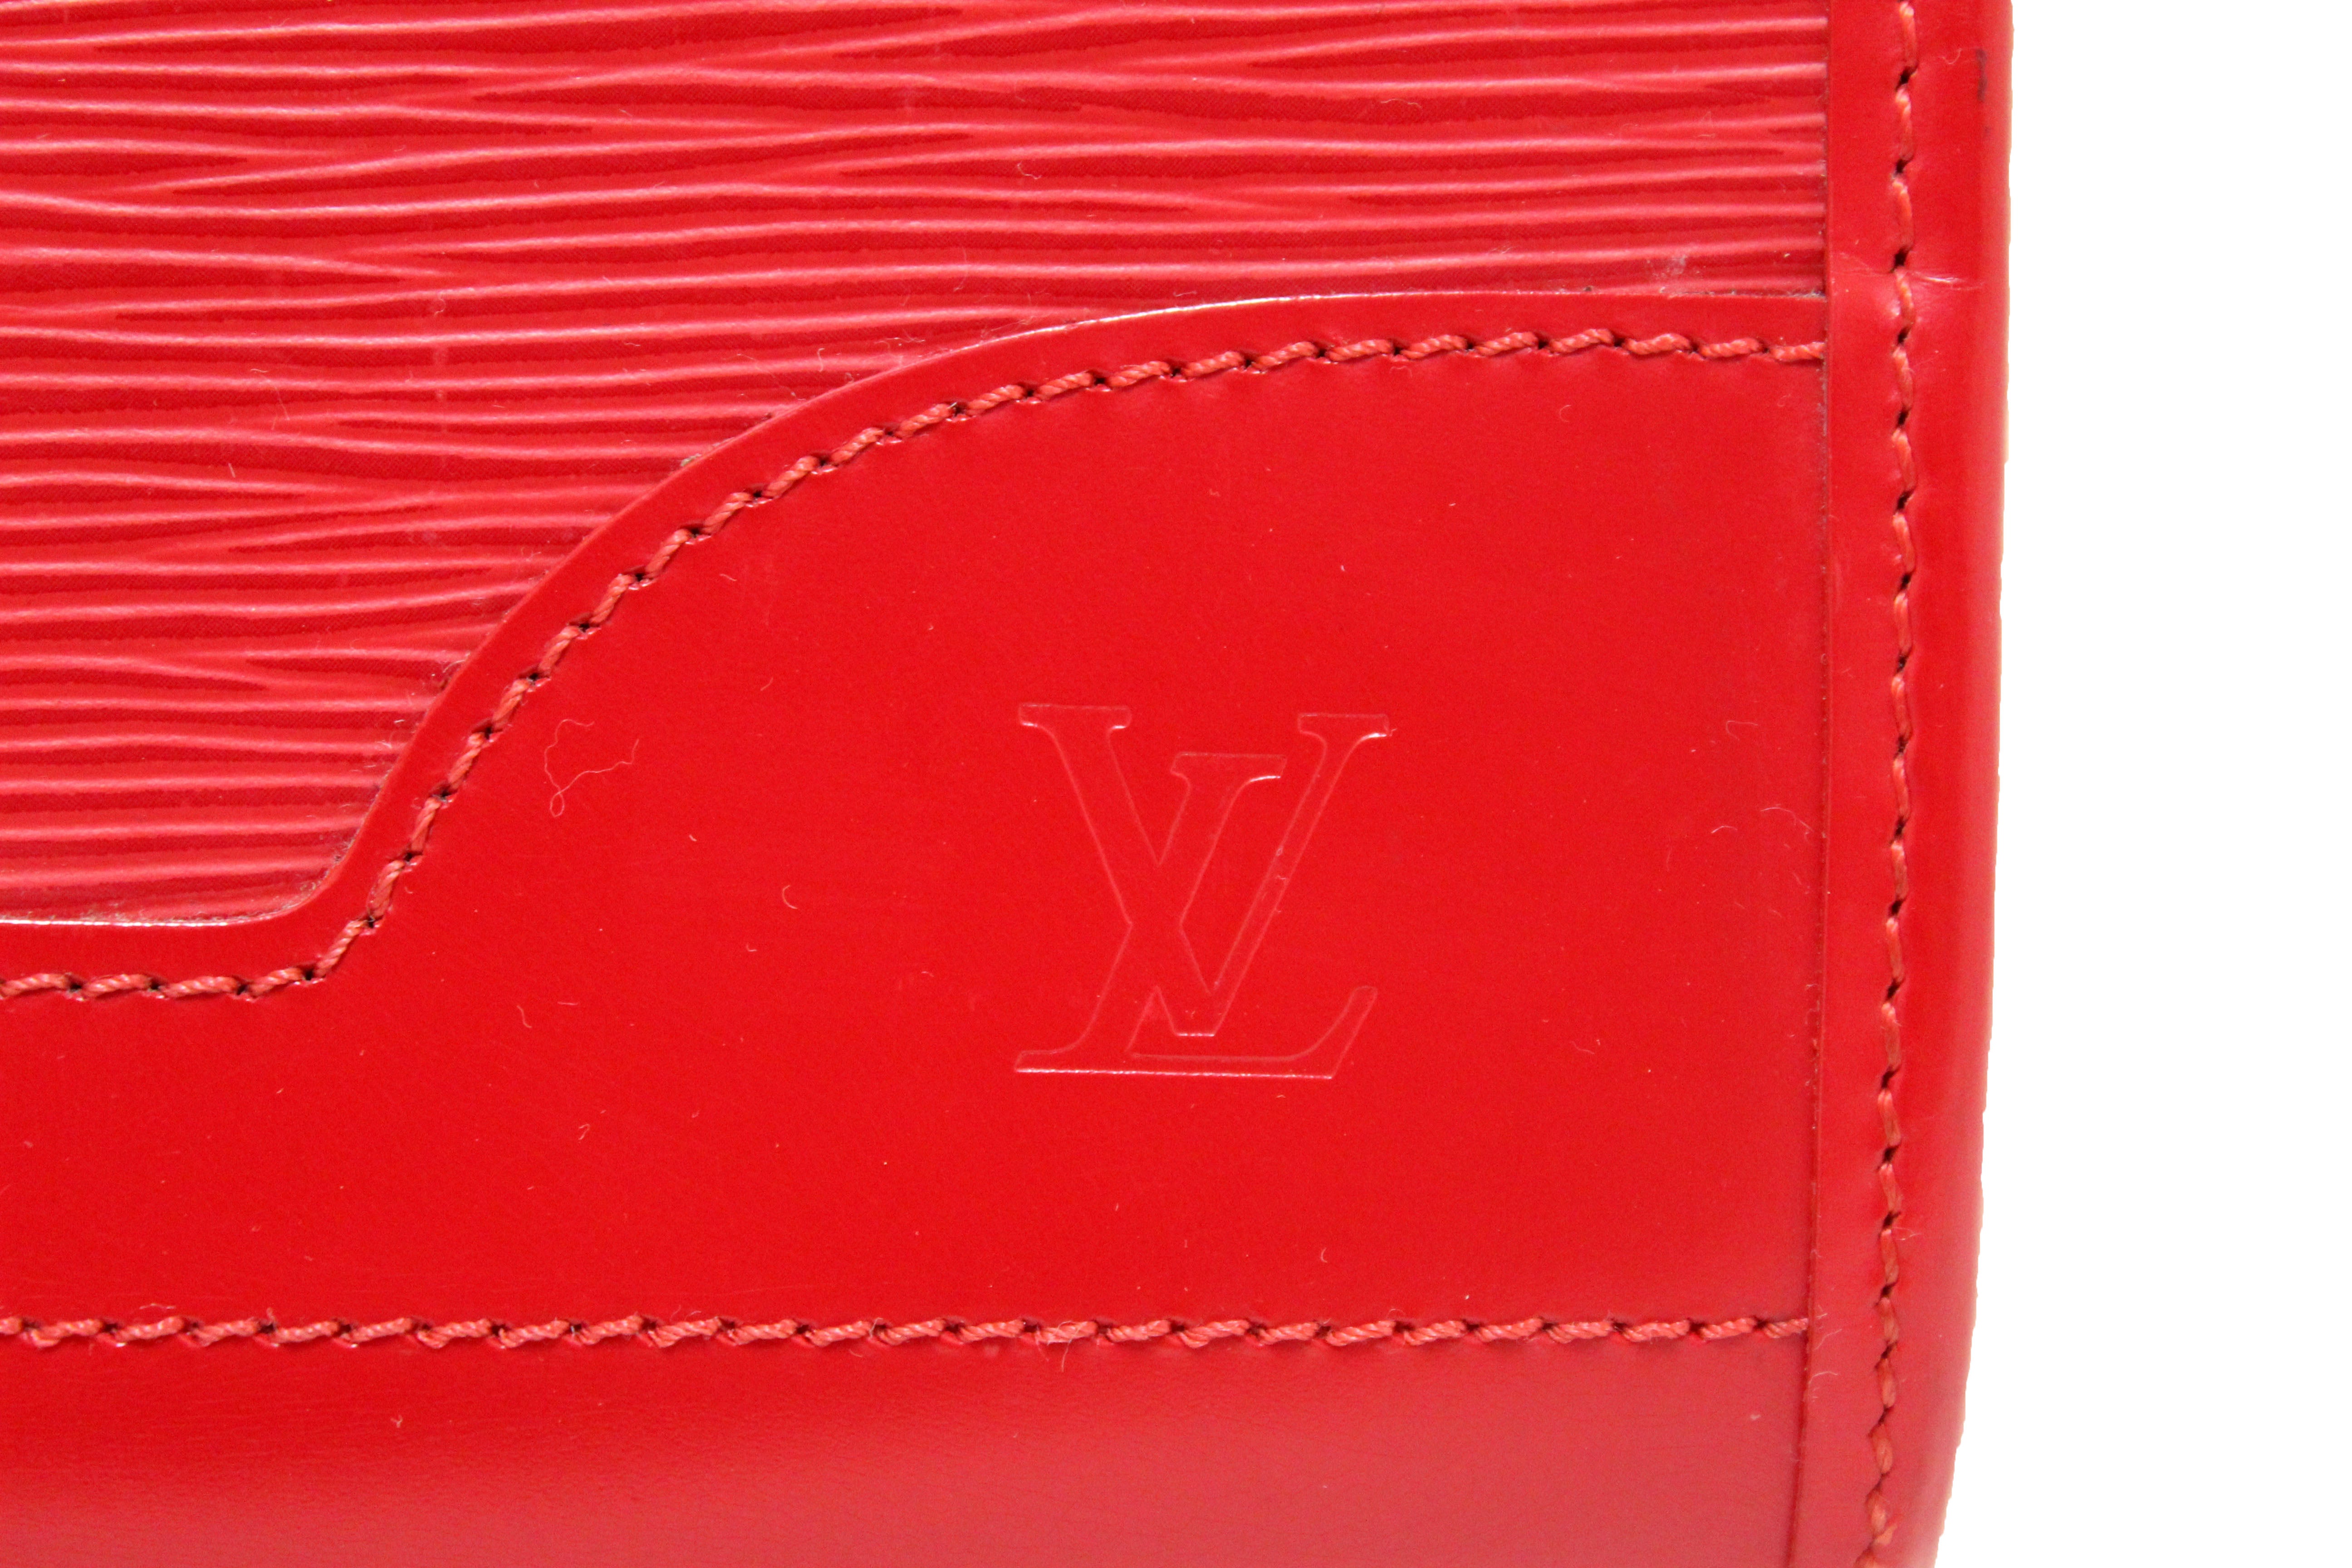 Authentic Louis Vuitton Red Epi Leather Madeleine PM Bag